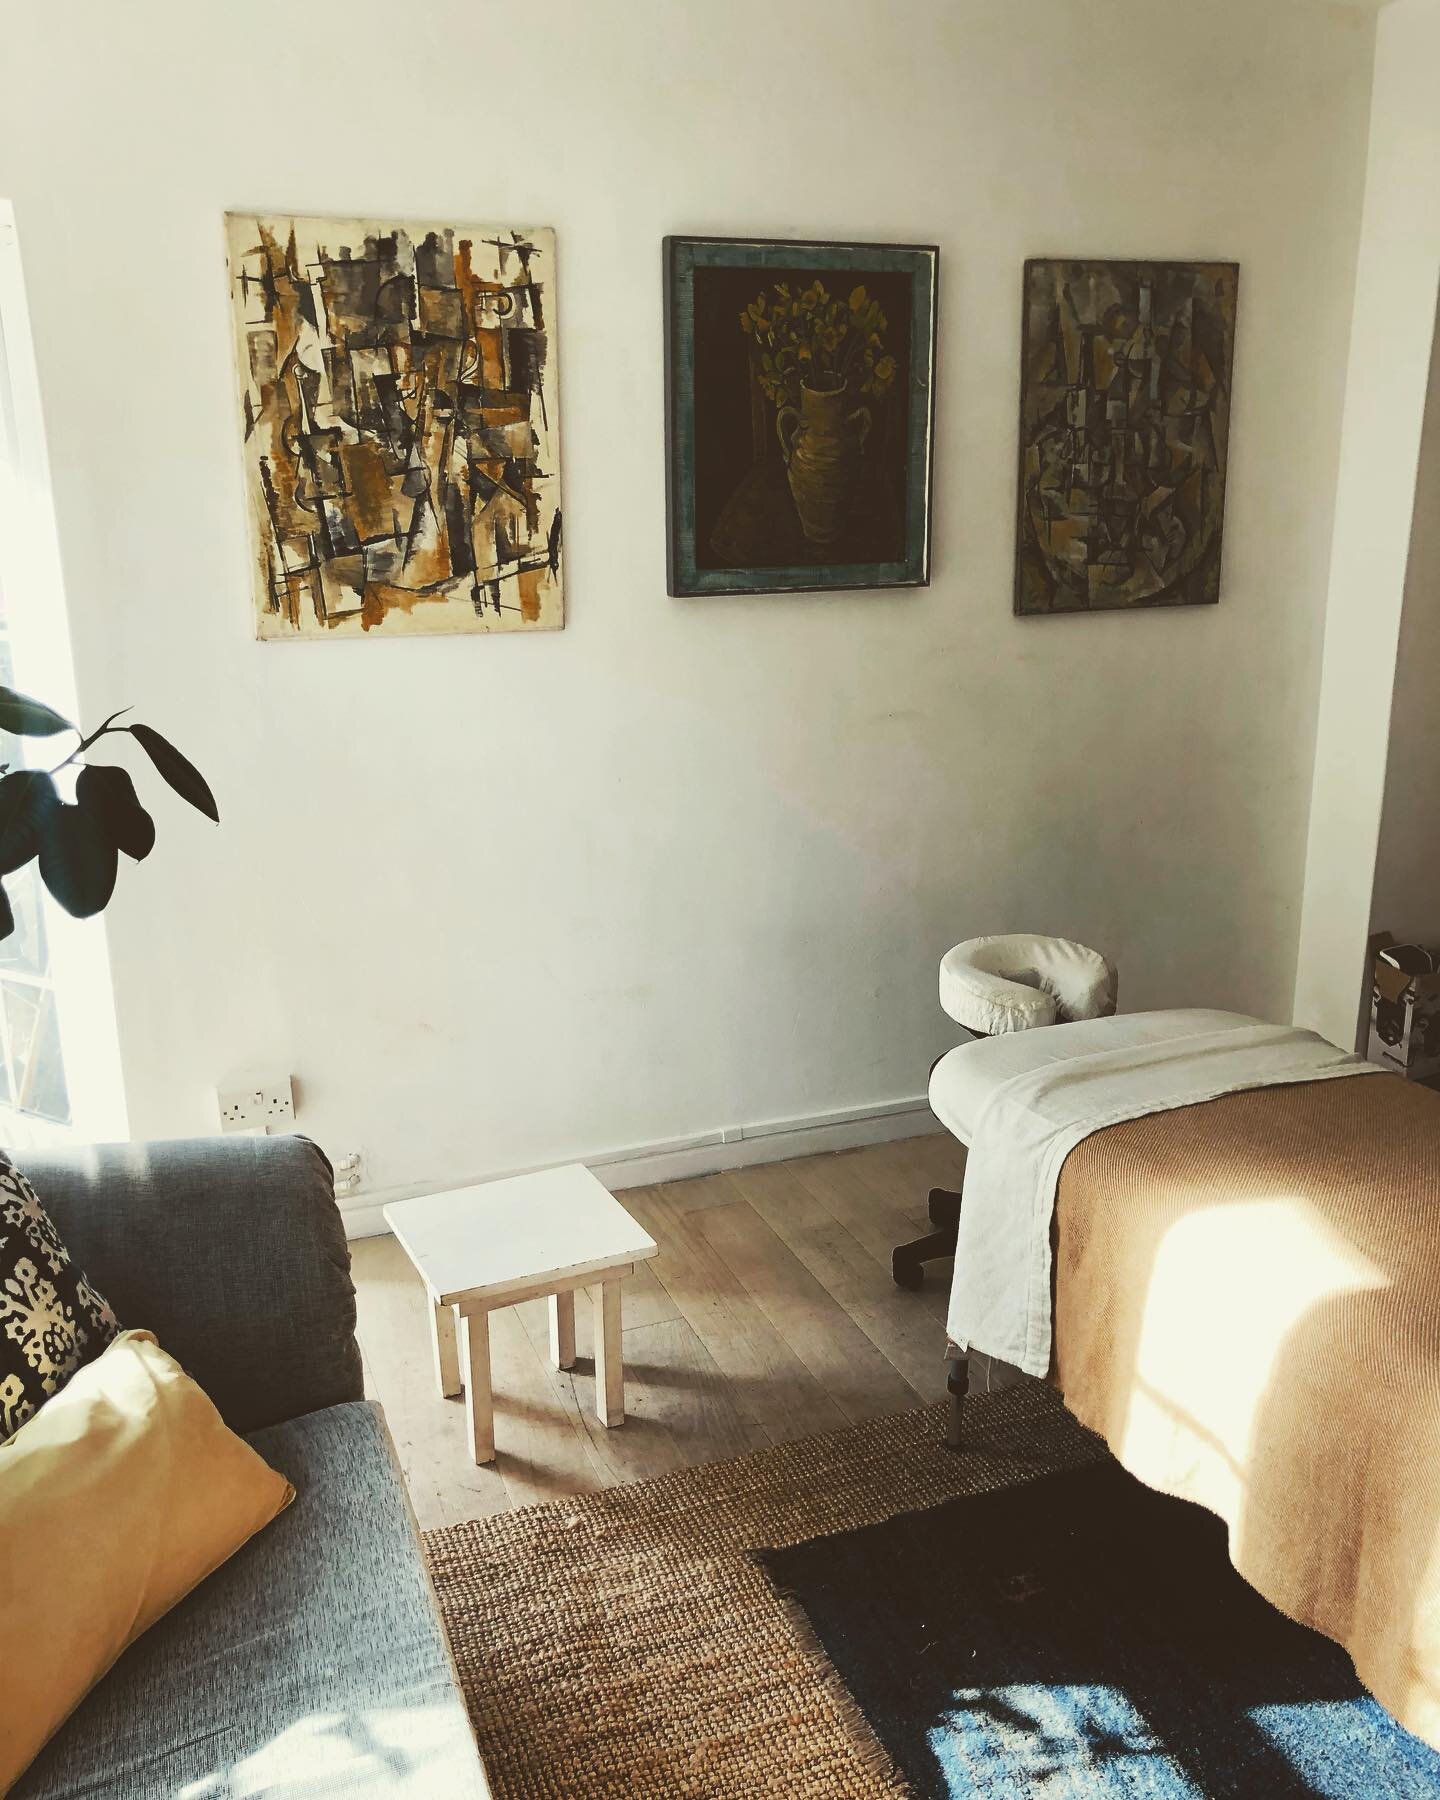 ✨ANNOUNCEMENT ✨

Hello folks! 
A few changes to my regular scheduling. Starting from August I am will longer be providing massages from my East London location. Instead I will now be welcoming folks to my cosy beautiful flat in Kentish Town, which wi